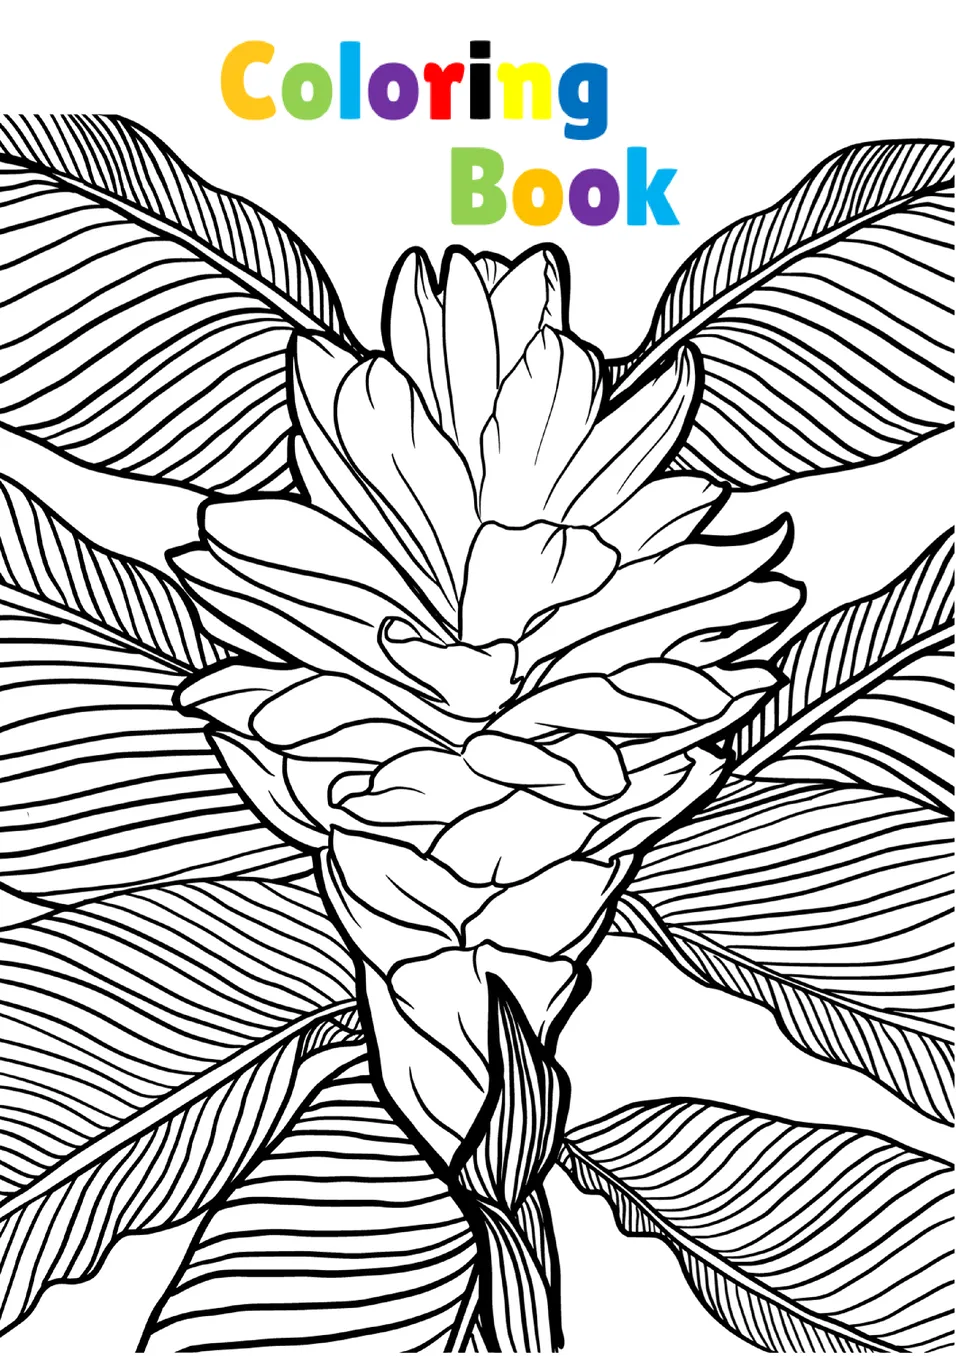 Free Coloring Book Template For Google Docs